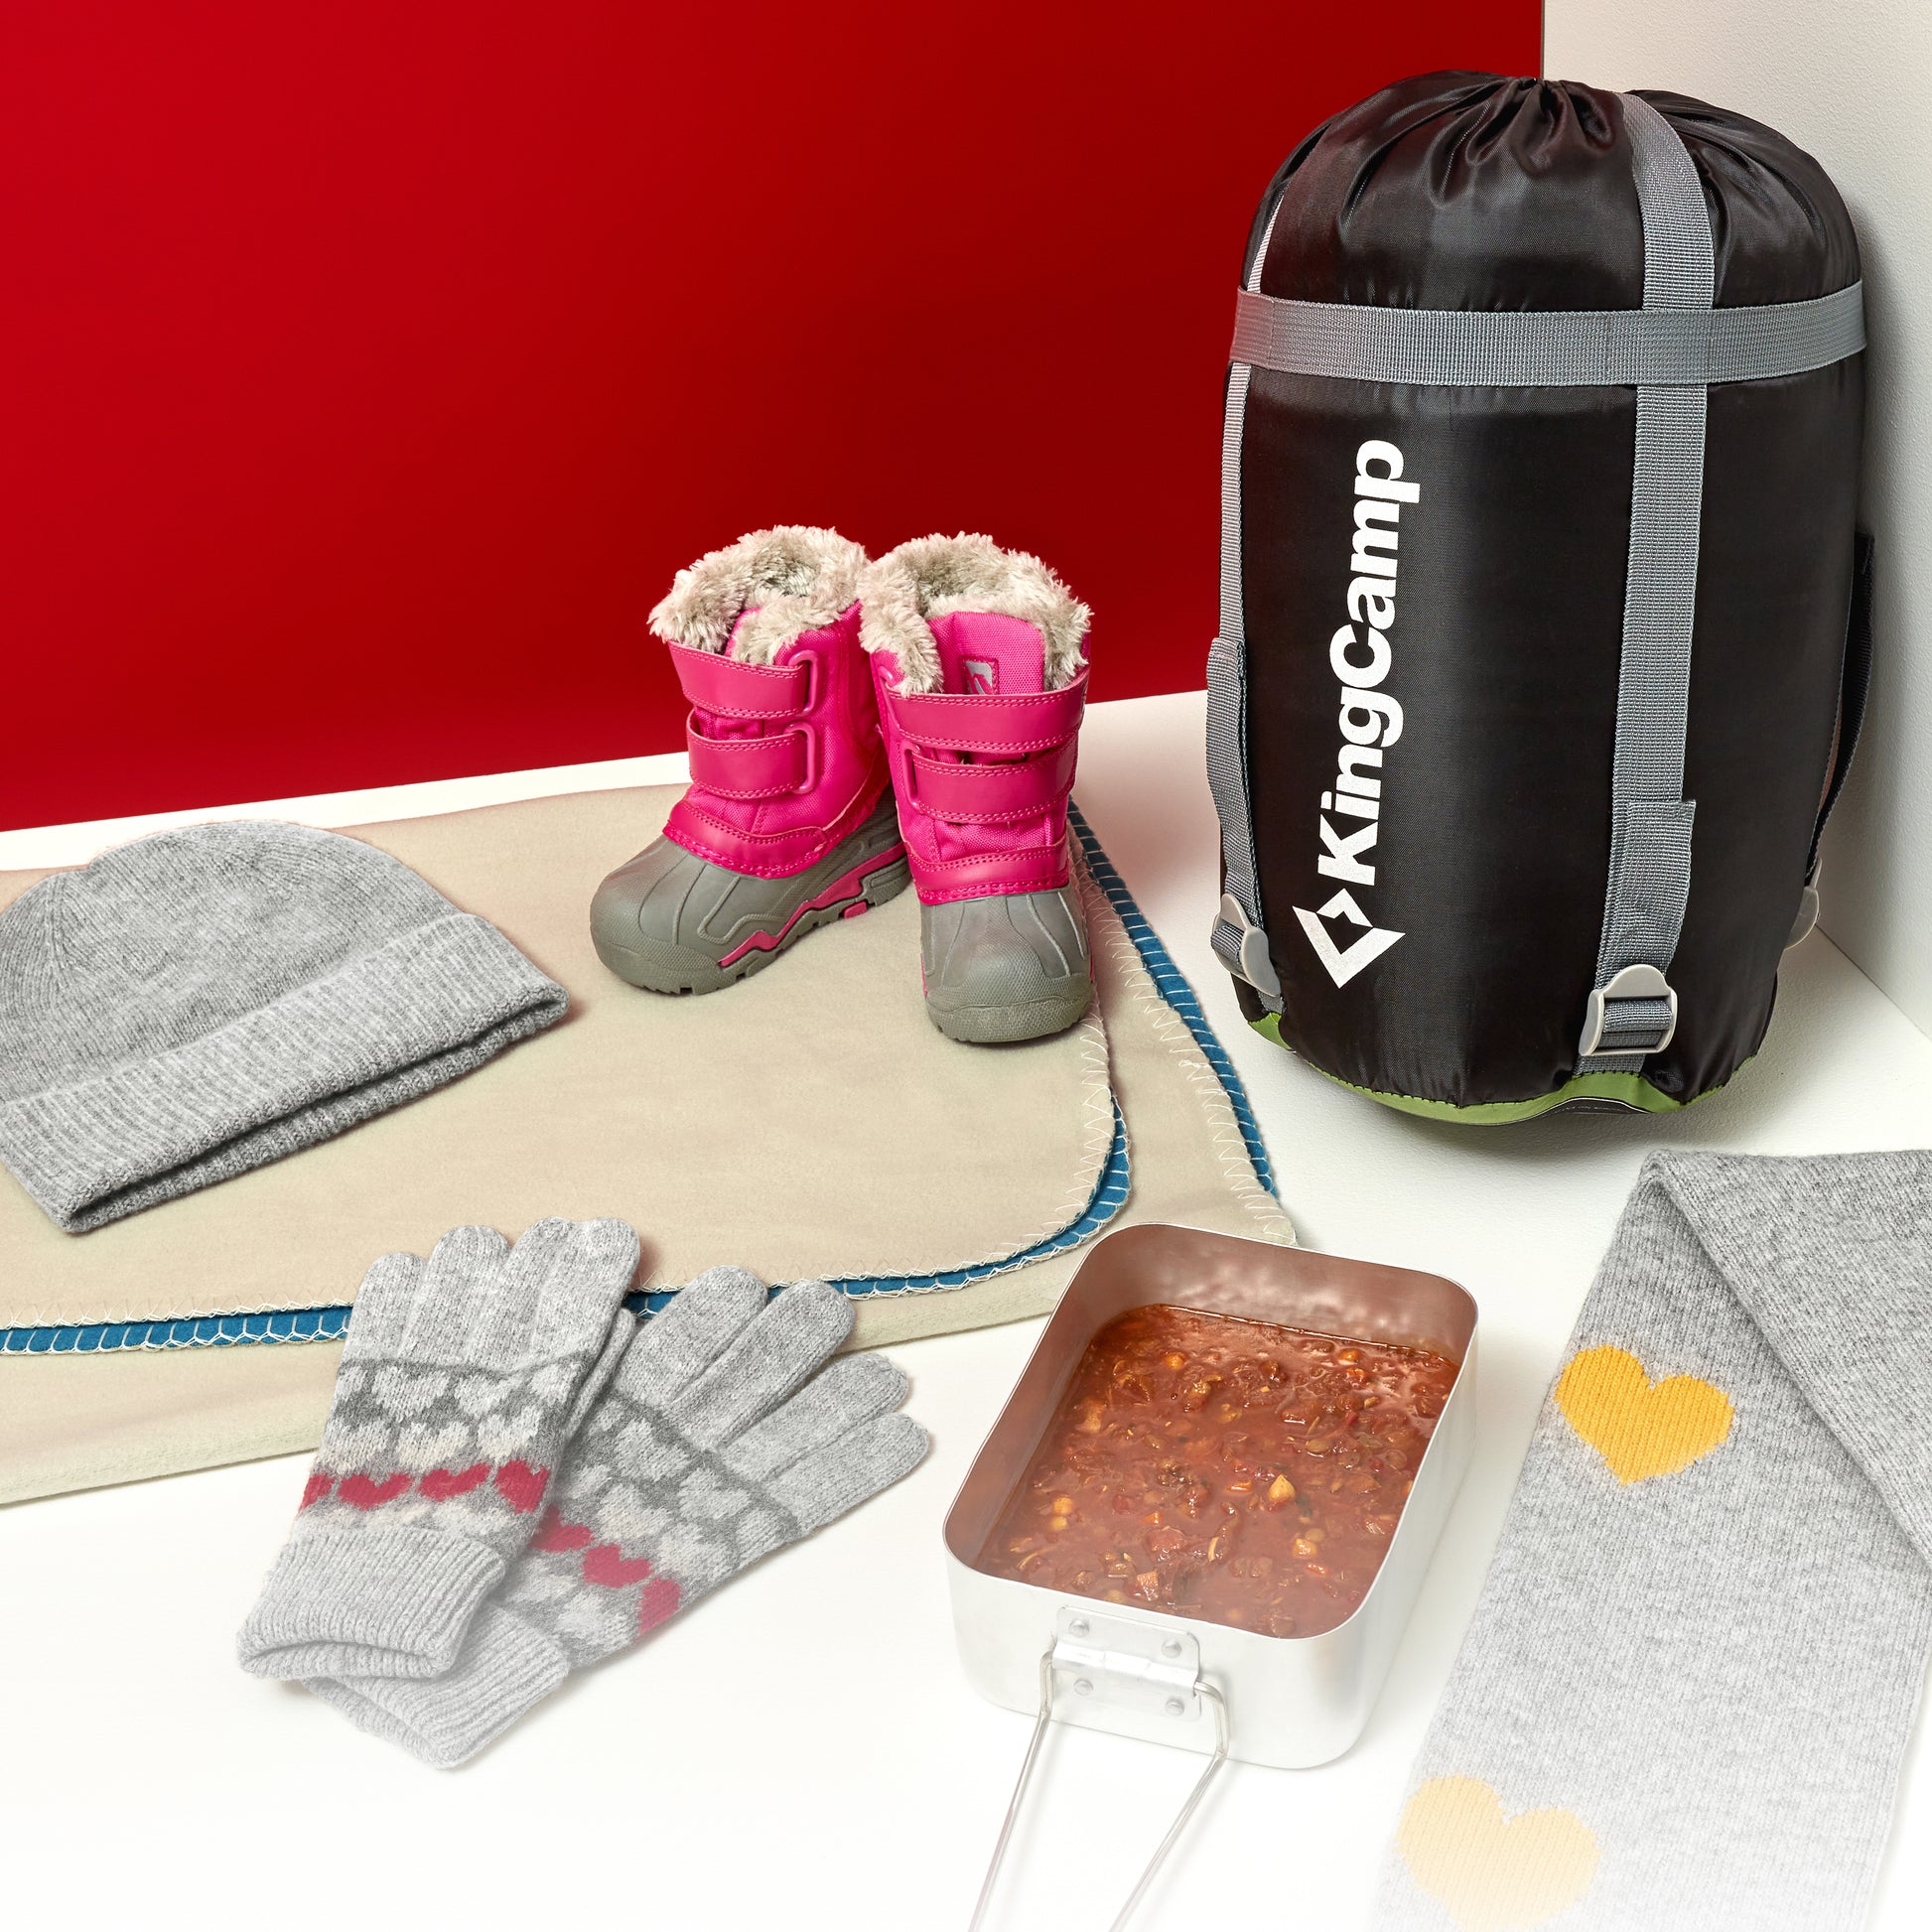 In the image there is a sleeping bag packed in a sack from KingCamp, a pair of girls winter boots, a blanket, a pair of winter essentials such as gloves, hat and scarf, and a portion of hot food in a metal container.